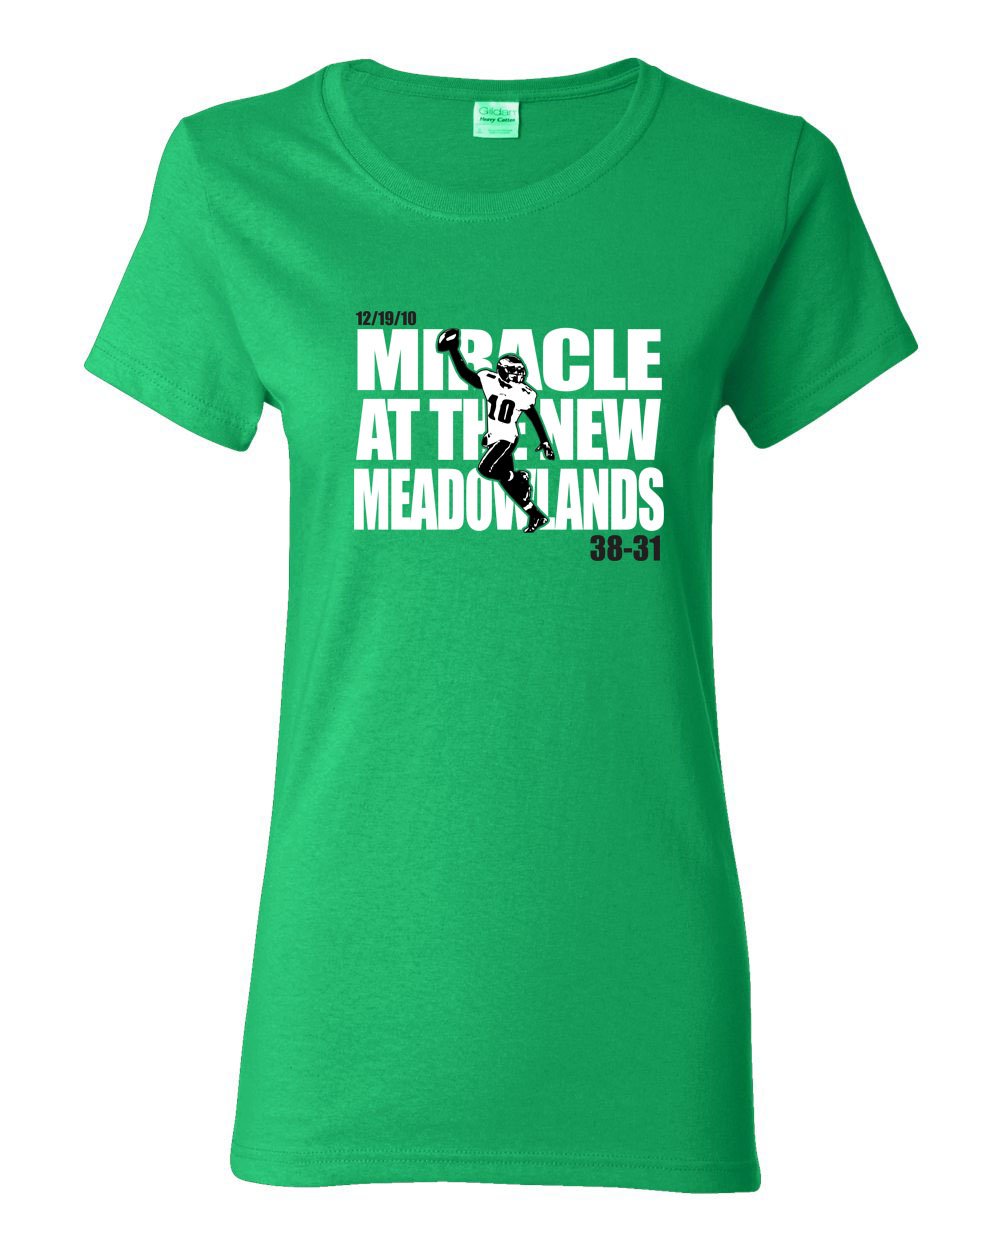 Miracle at the New Meadowlands LADIES Missy-Fit T-Shirt